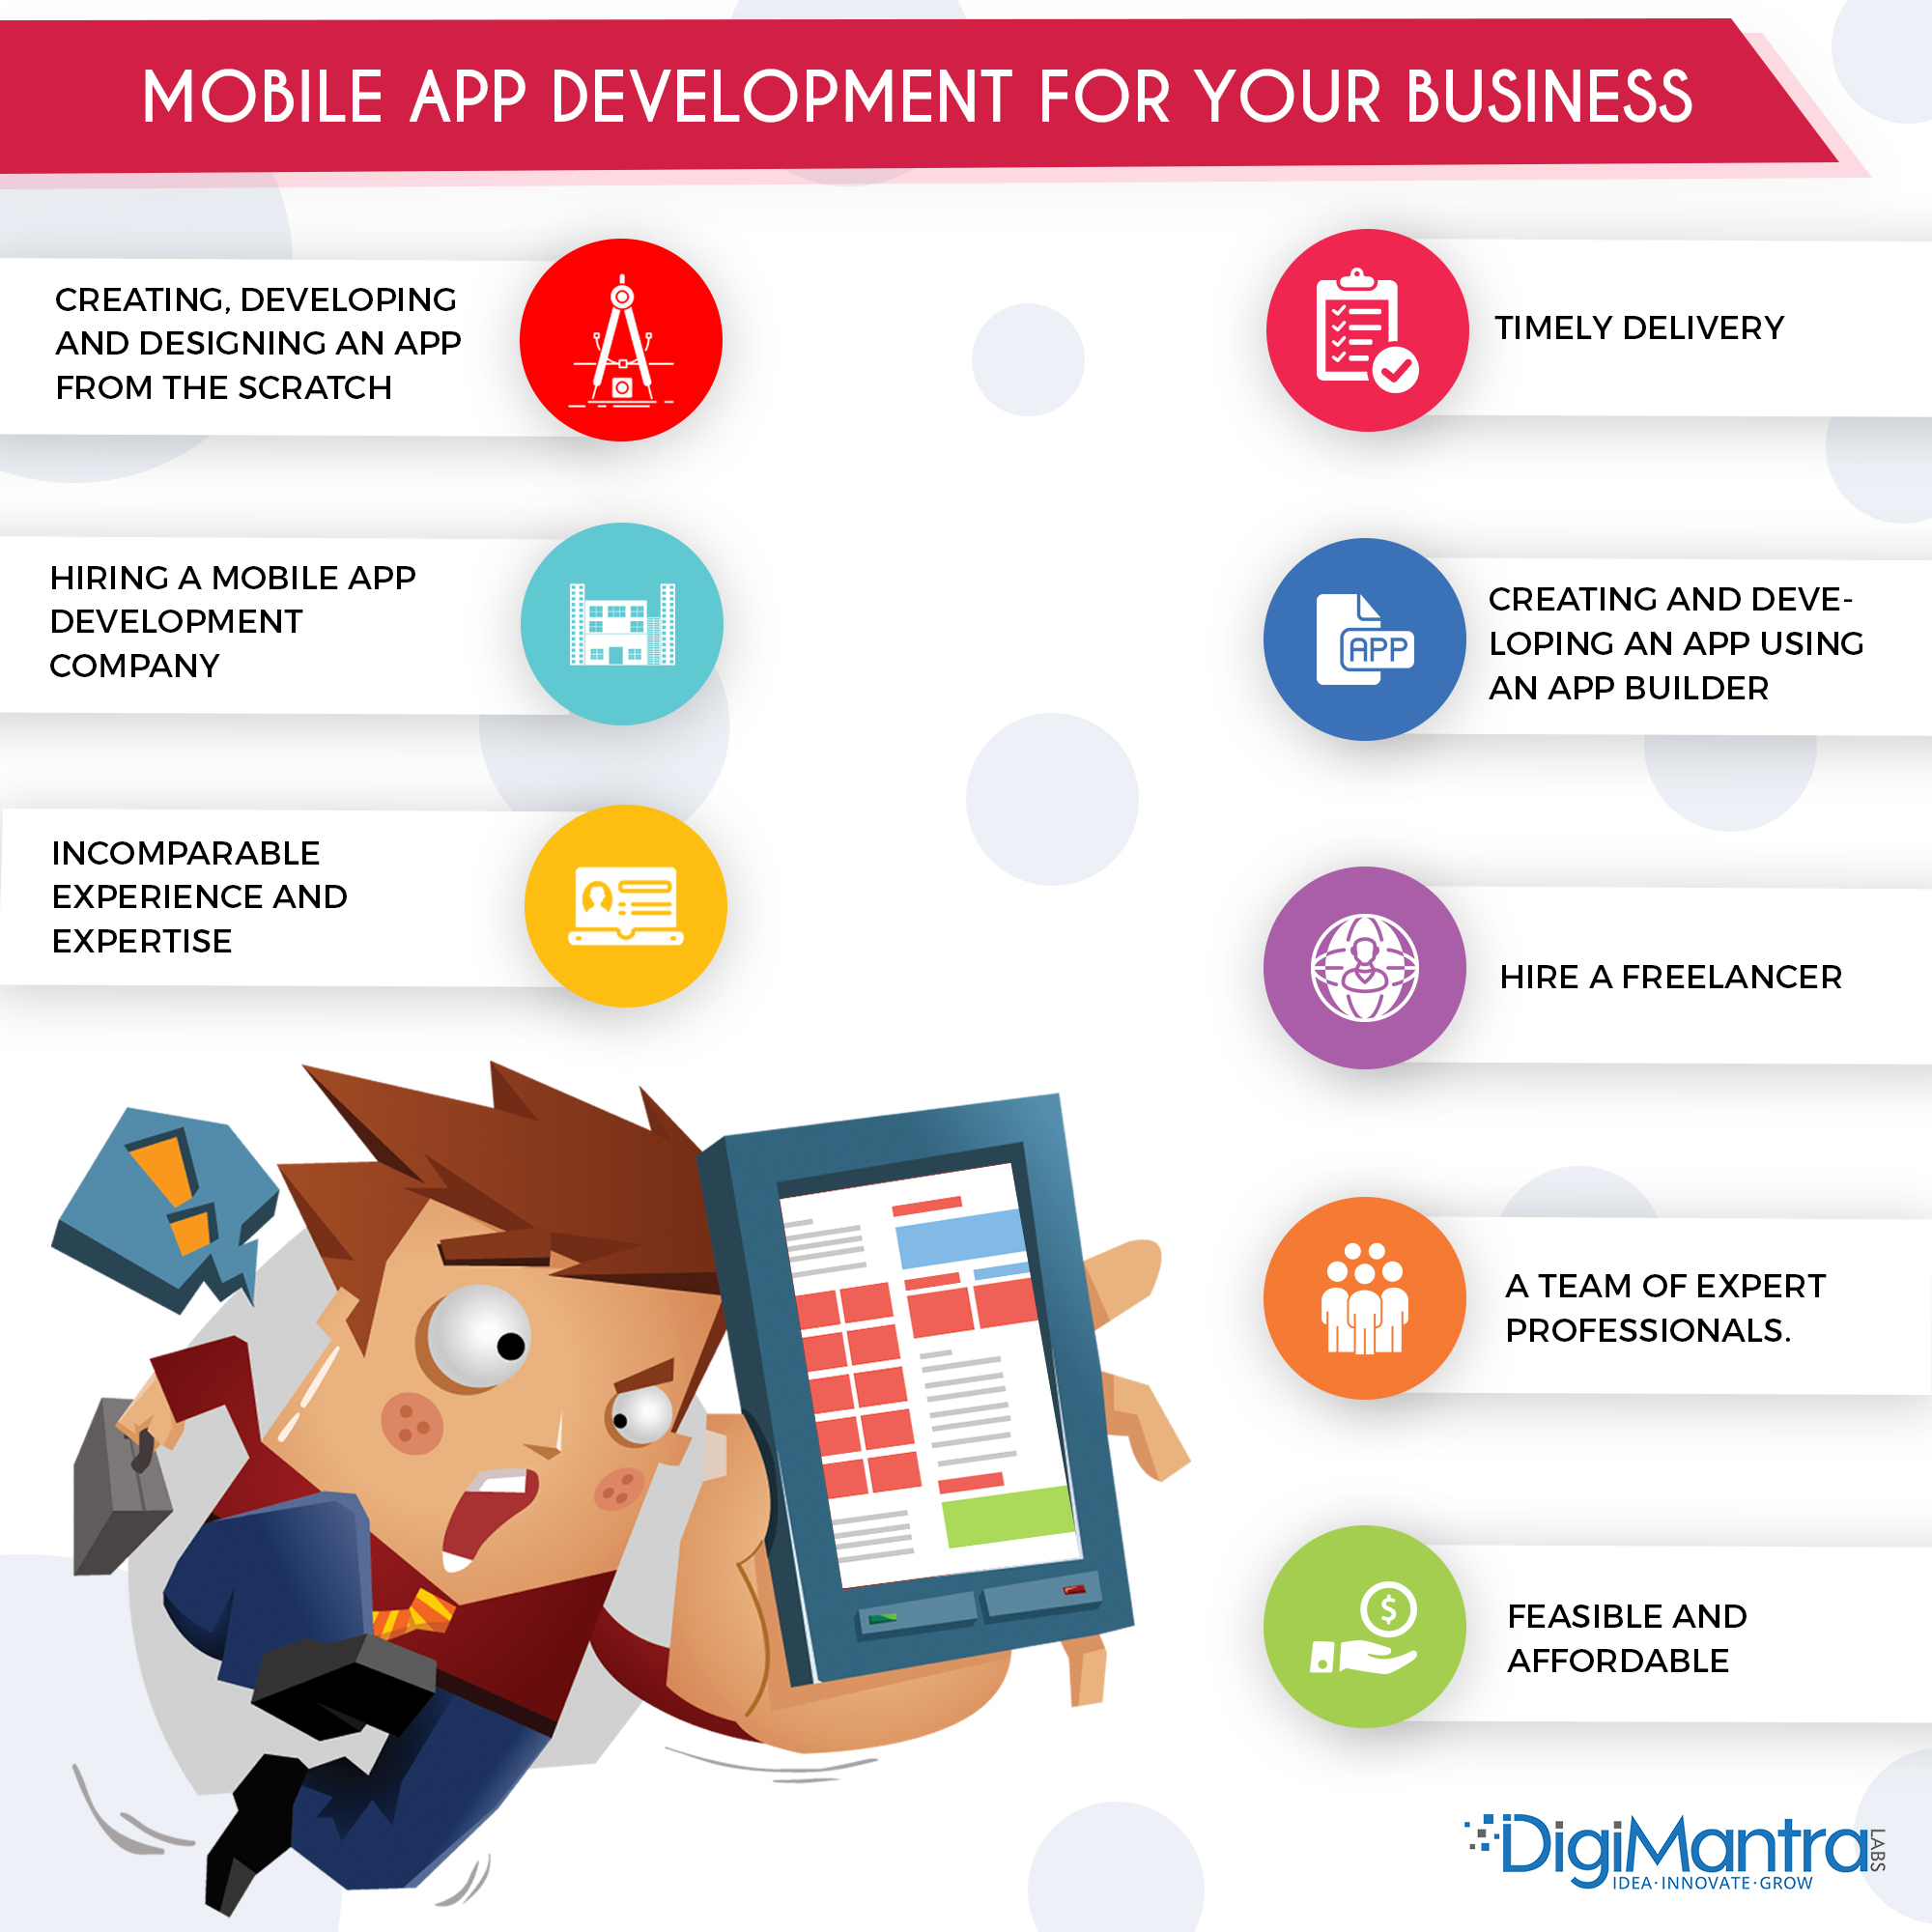 Mobile app development for your business